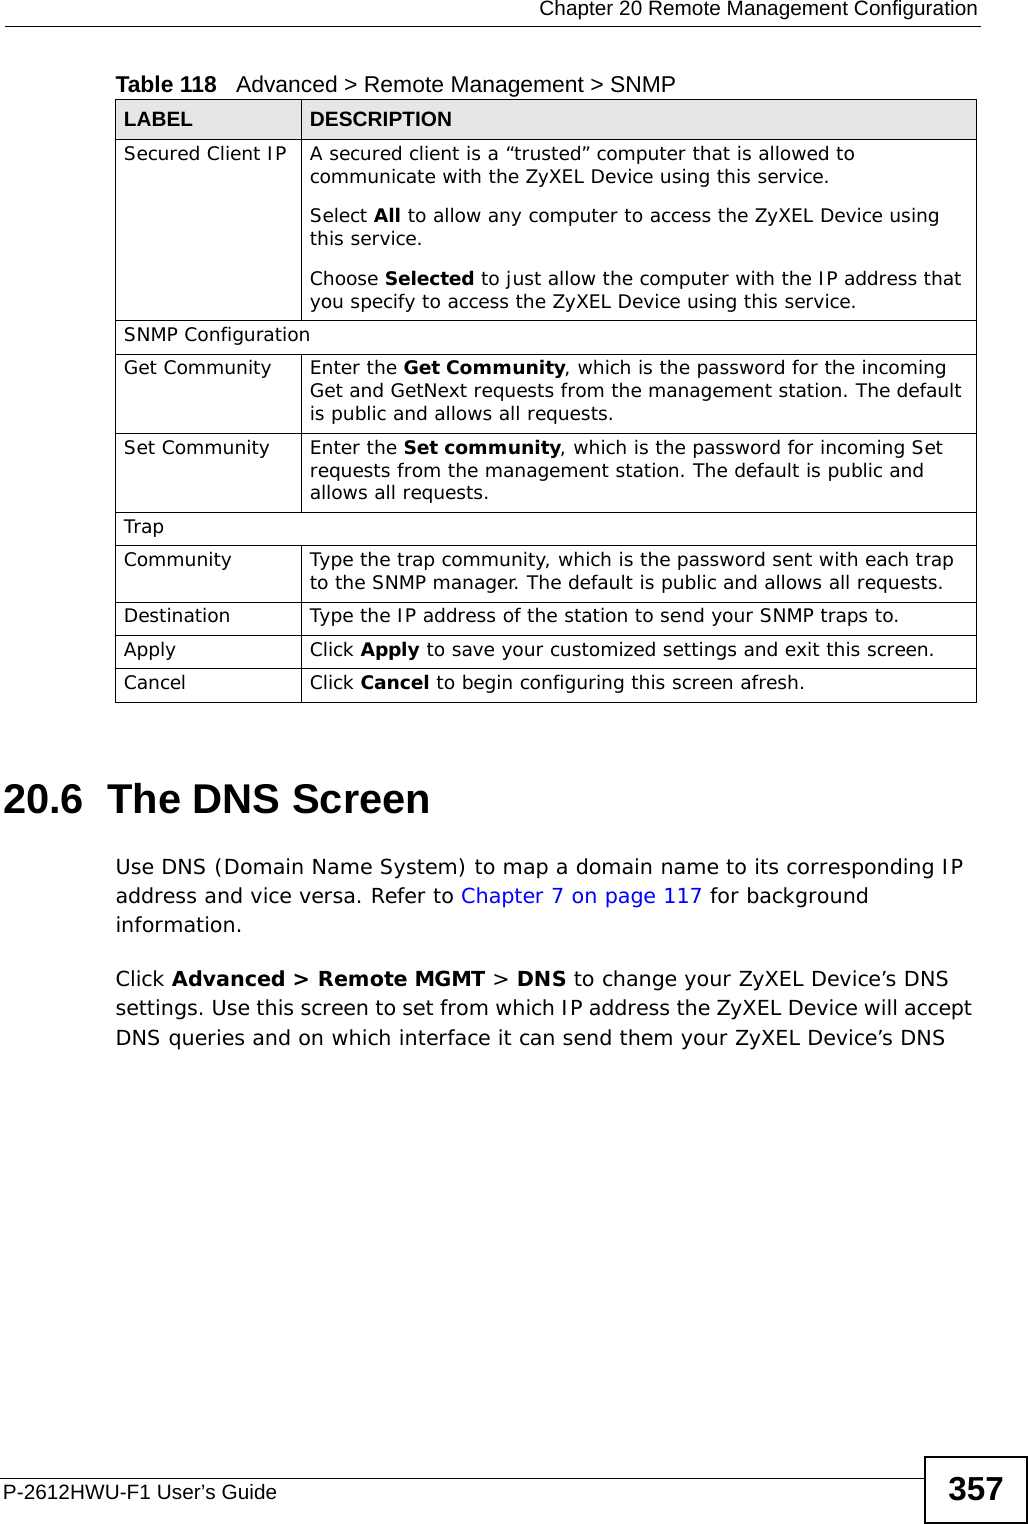  Chapter 20 Remote Management ConfigurationP-2612HWU-F1 User’s Guide 35720.6  The DNS Screen Use DNS (Domain Name System) to map a domain name to its corresponding IP address and vice versa. Refer to Chapter 7 on page 117 for background information. Click Advanced &gt; Remote MGMT &gt; DNS to change your ZyXEL Device’s DNS settings. Use this screen to set from which IP address the ZyXEL Device will accept DNS queries and on which interface it can send them your ZyXEL Device’s DNS Secured Client IP A secured client is a “trusted” computer that is allowed to communicate with the ZyXEL Device using this service. Select All to allow any computer to access the ZyXEL Device using this service.Choose Selected to just allow the computer with the IP address that you specify to access the ZyXEL Device using this service.SNMP ConfigurationGet Community Enter the Get Community, which is the password for the incoming Get and GetNext requests from the management station. The default is public and allows all requests.Set Community Enter the Set community, which is the password for incoming Set requests from the management station. The default is public and allows all requests.TrapCommunity Type the trap community, which is the password sent with each trap to the SNMP manager. The default is public and allows all requests.Destination Type the IP address of the station to send your SNMP traps to.Apply Click Apply to save your customized settings and exit this screen. Cancel Click Cancel to begin configuring this screen afresh.Table 118   Advanced &gt; Remote Management &gt; SNMPLABEL DESCRIPTION